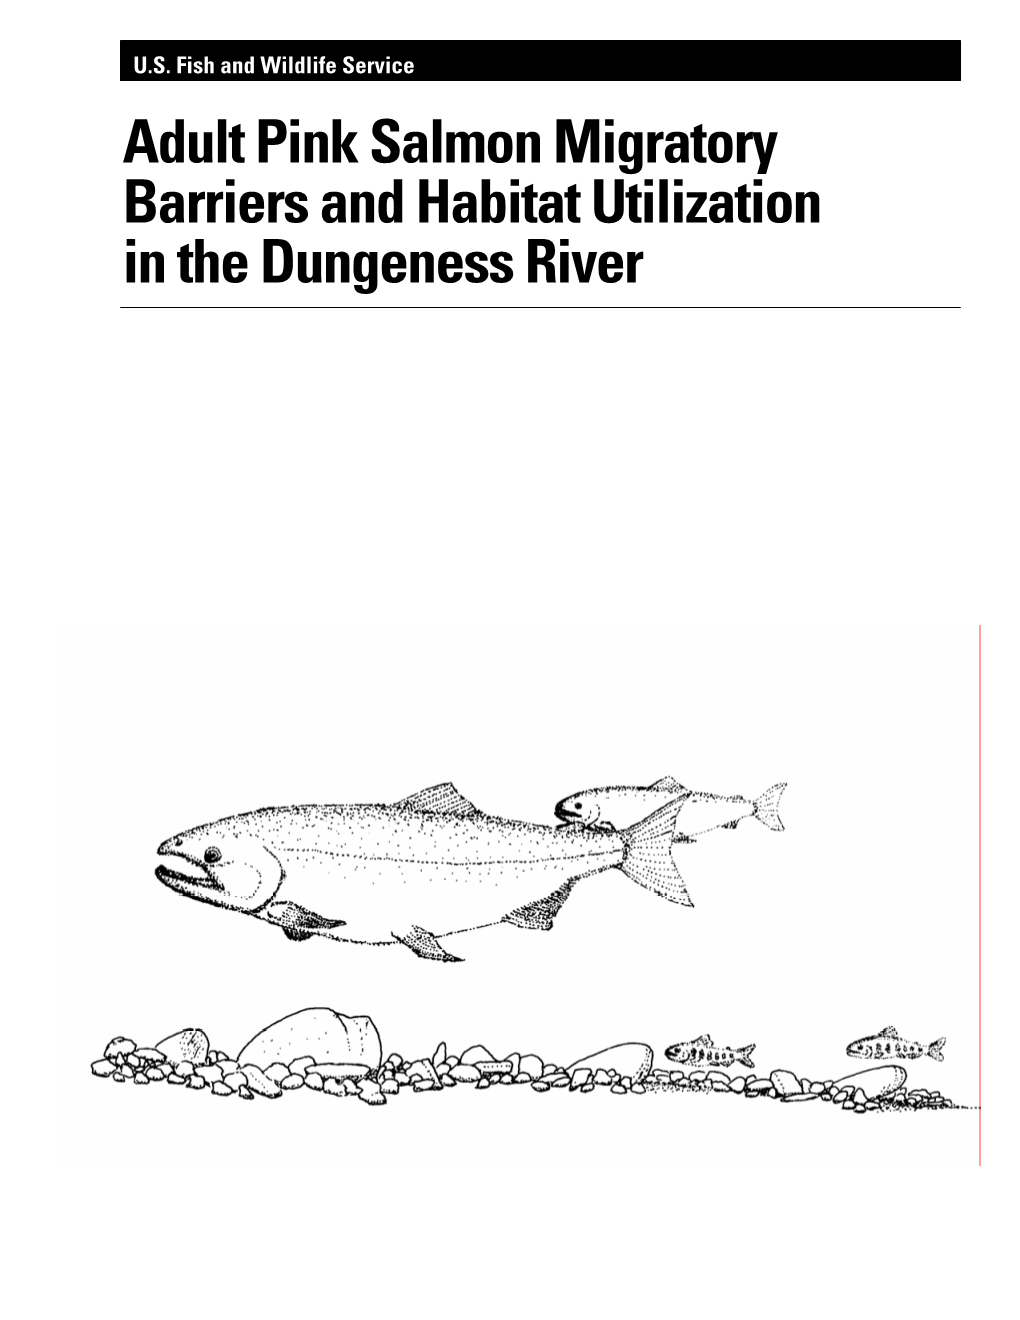 Adult Pink Salmon Migratory Barriers and Habitat Utilization in the Dungeness River